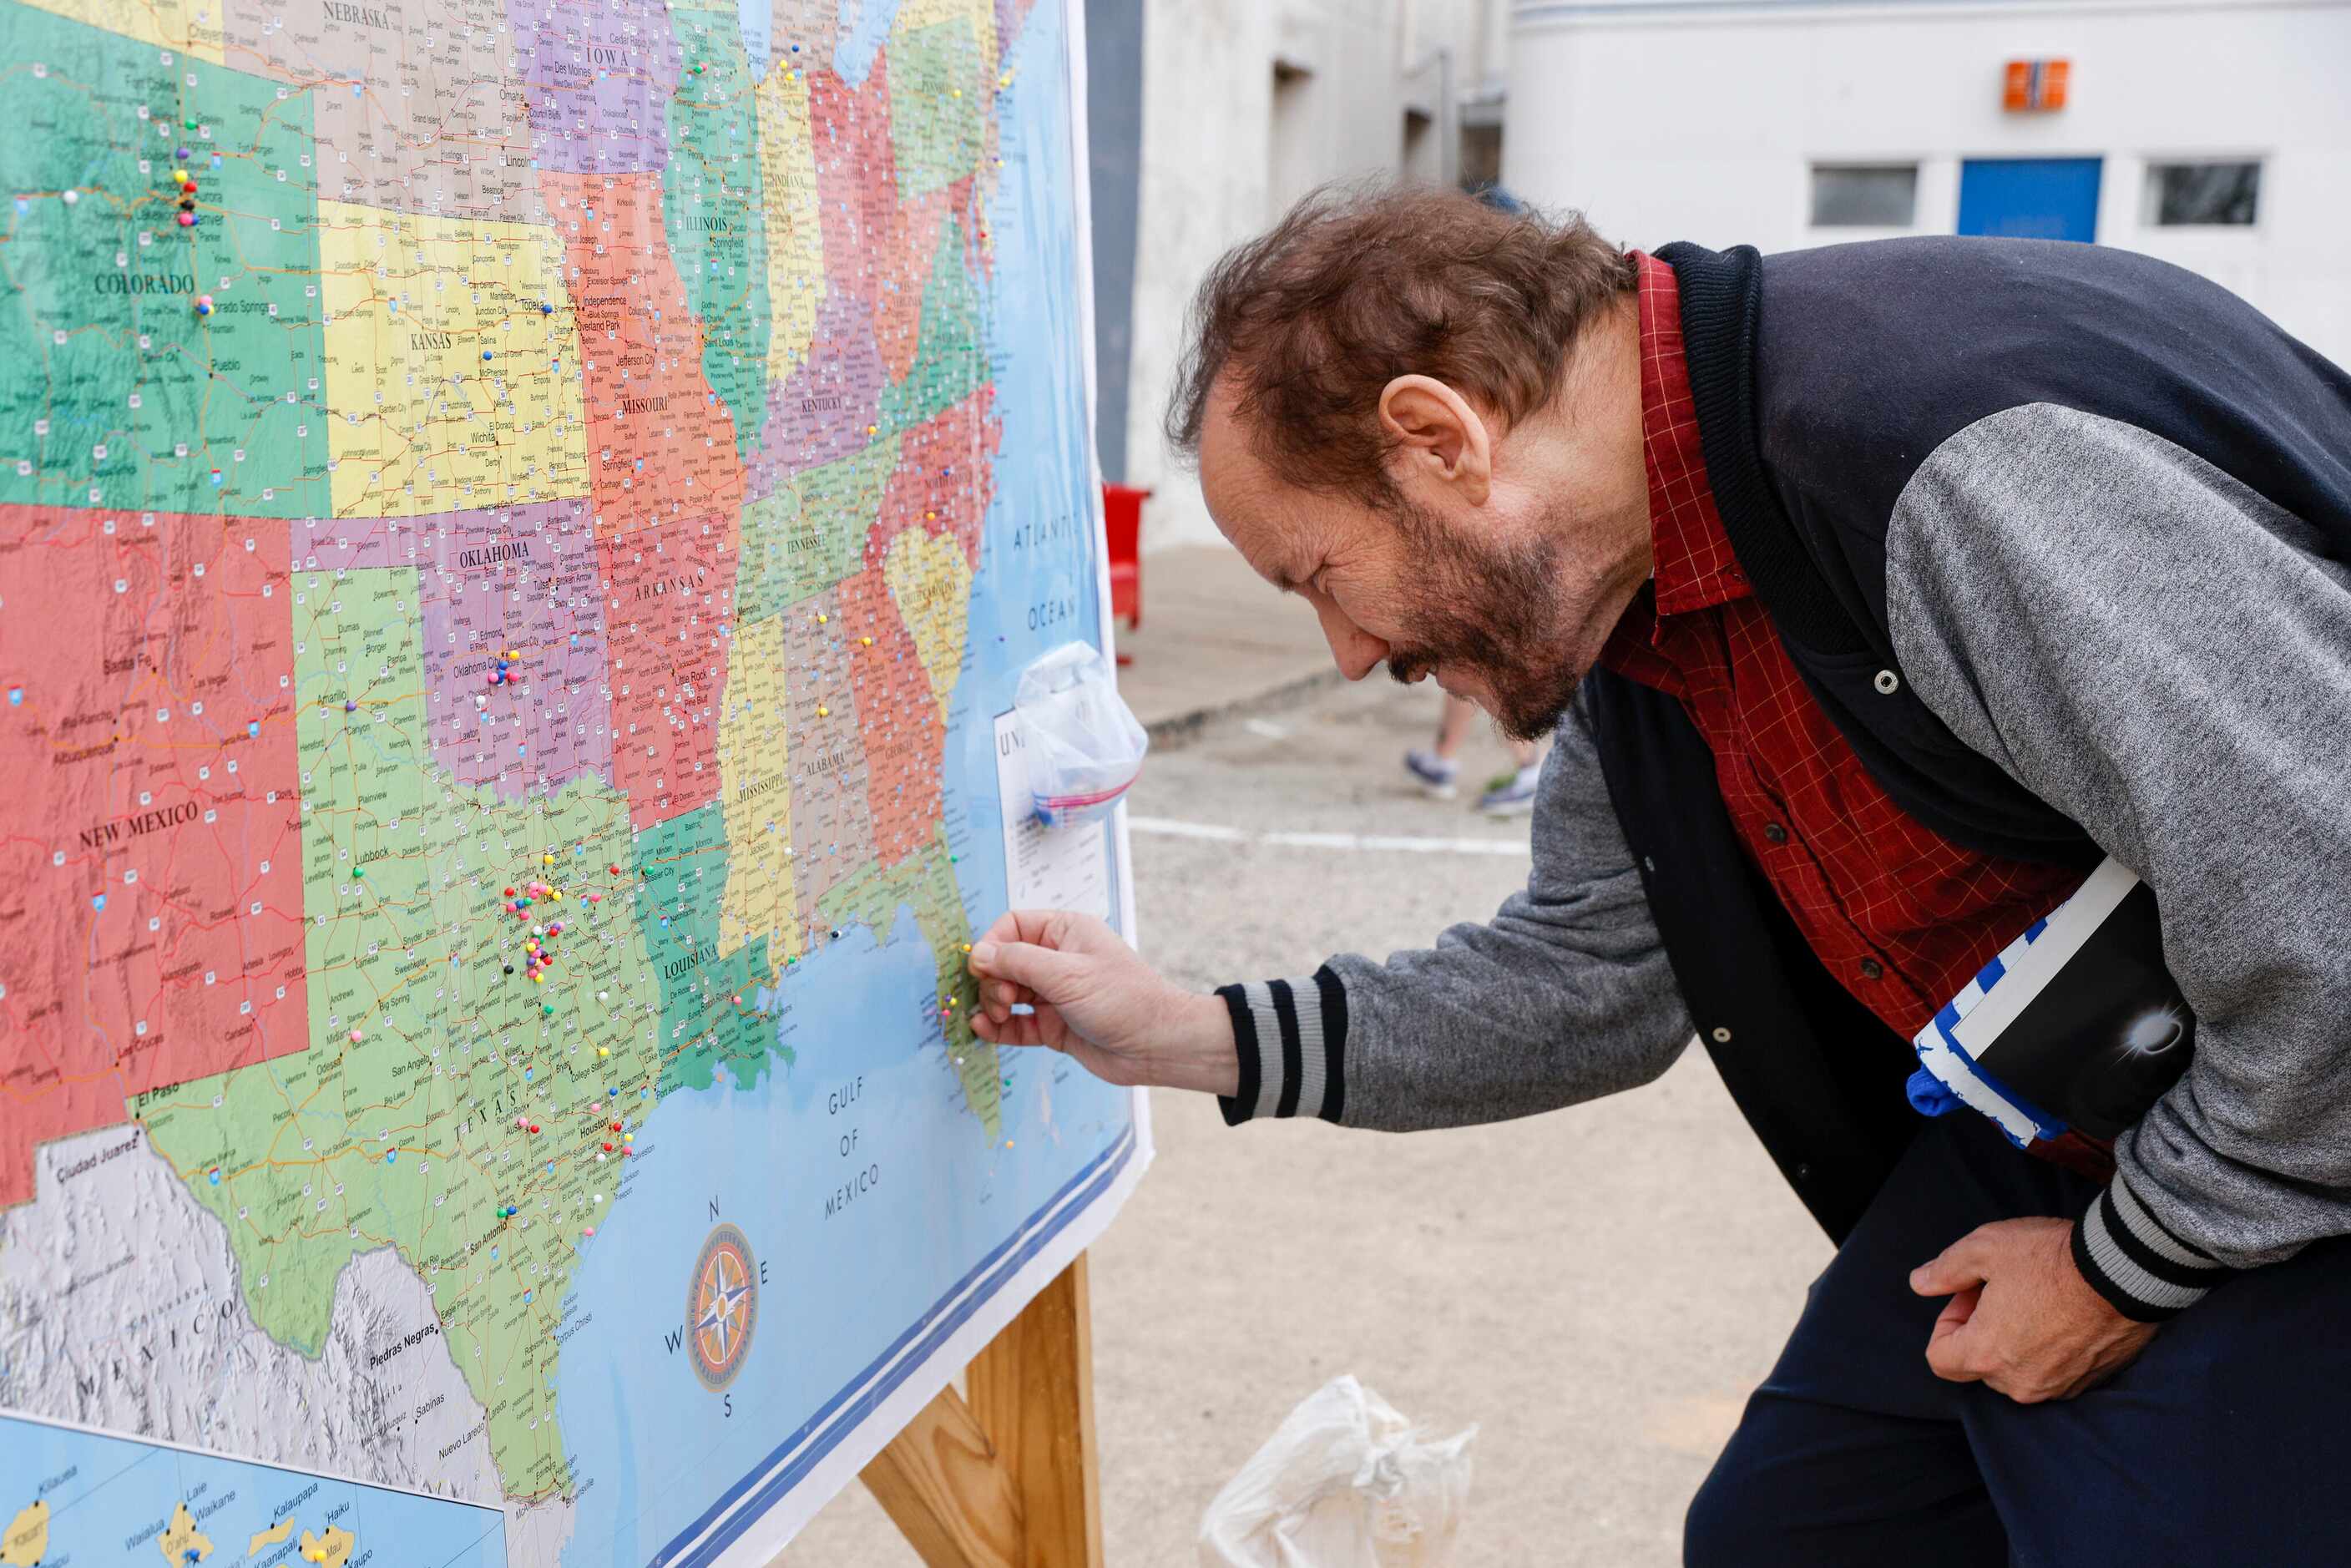 Mike Carlock of Stewart, Florida places a pin onto a map to mark where he’s from before a...